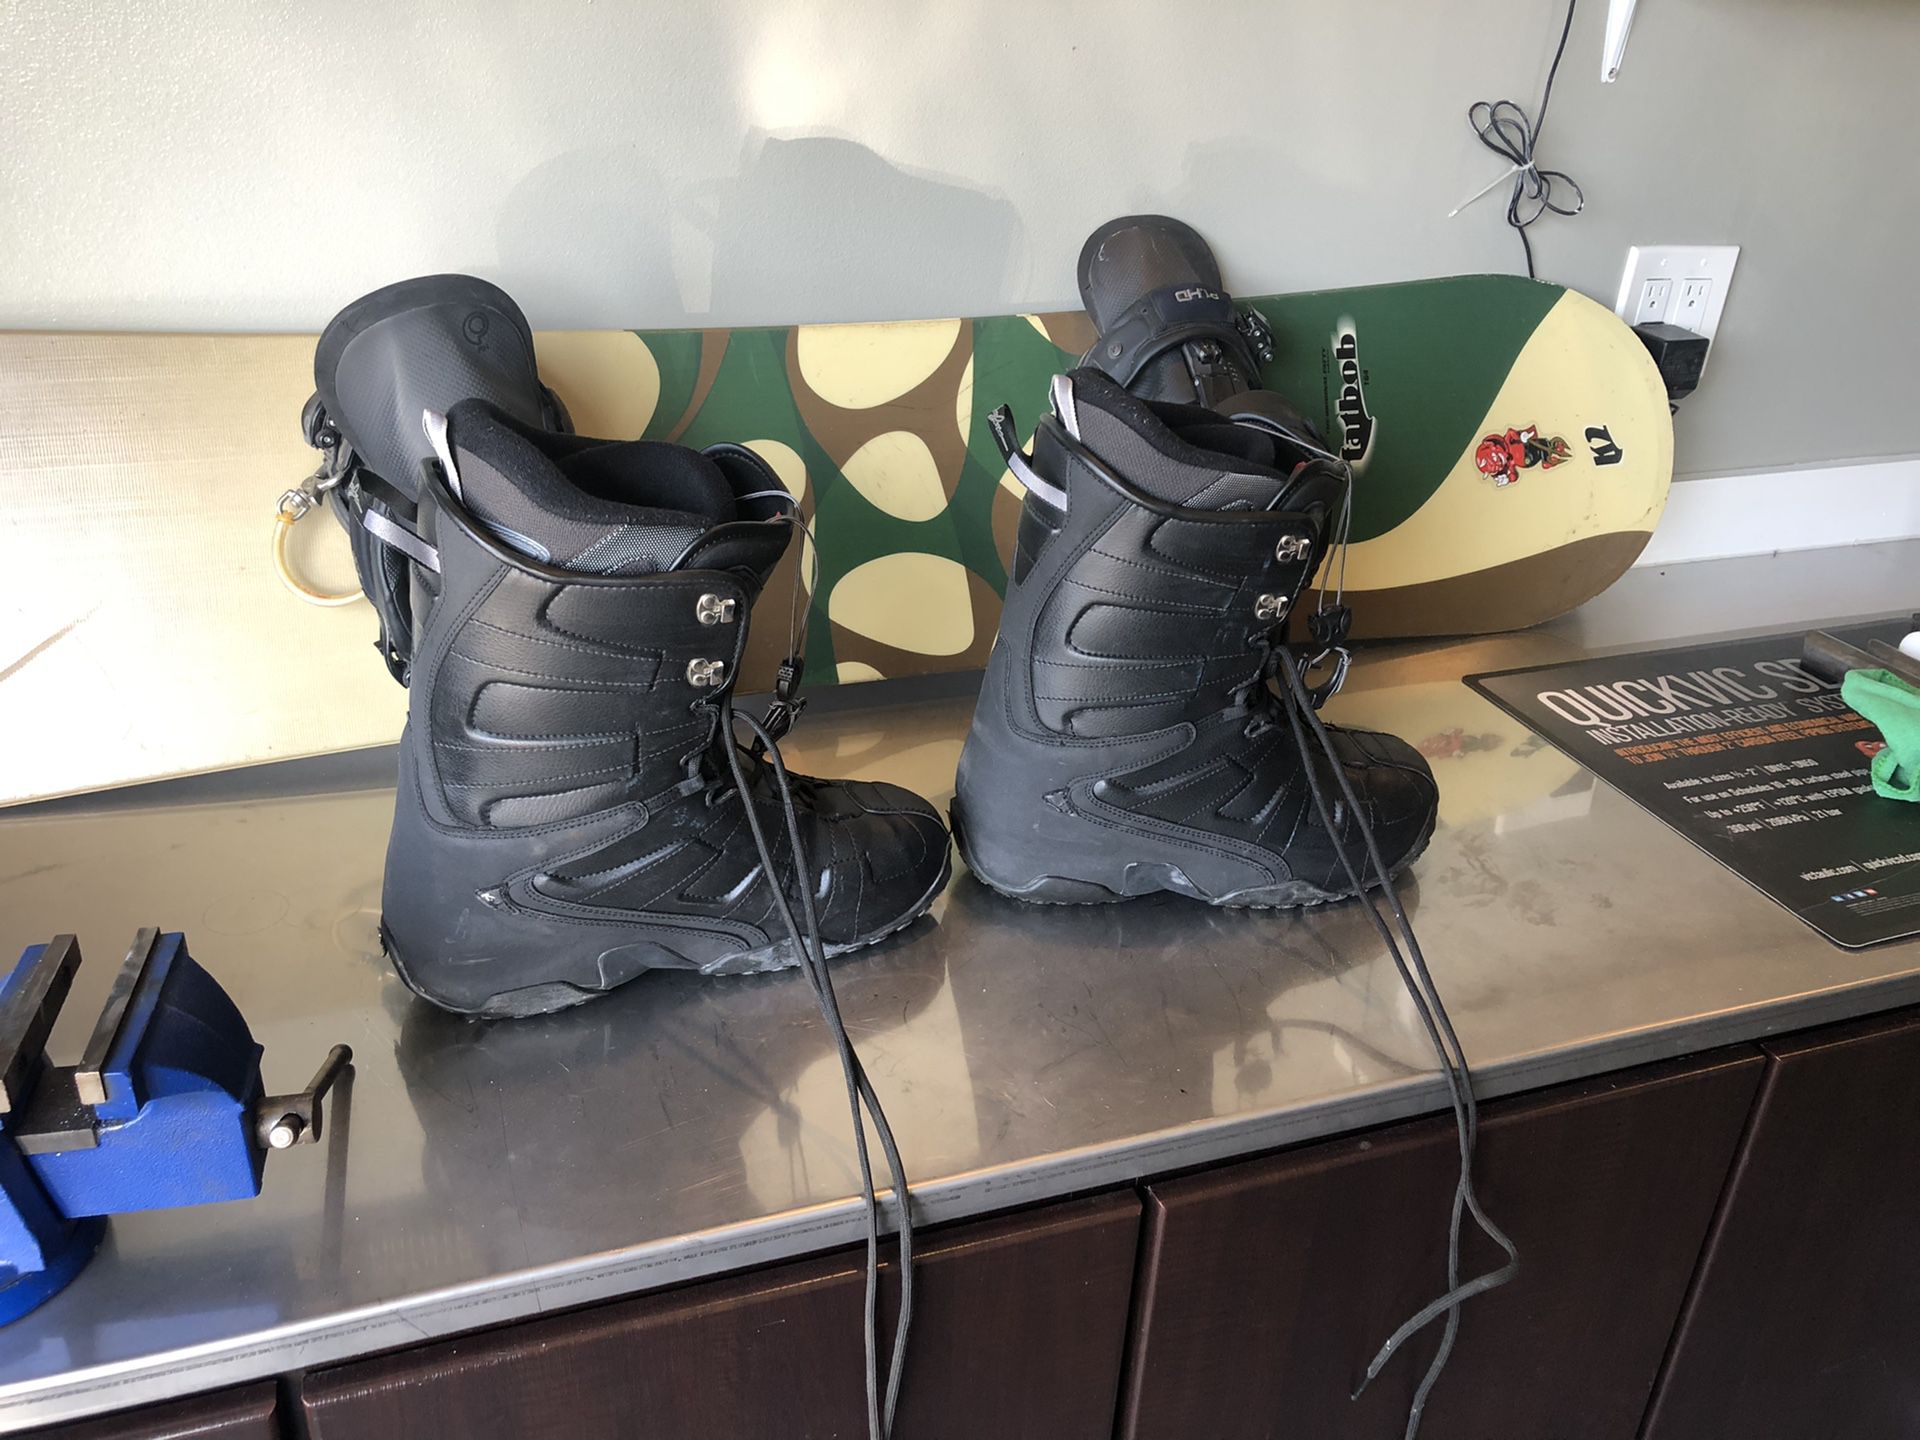 Snowboard and Boots